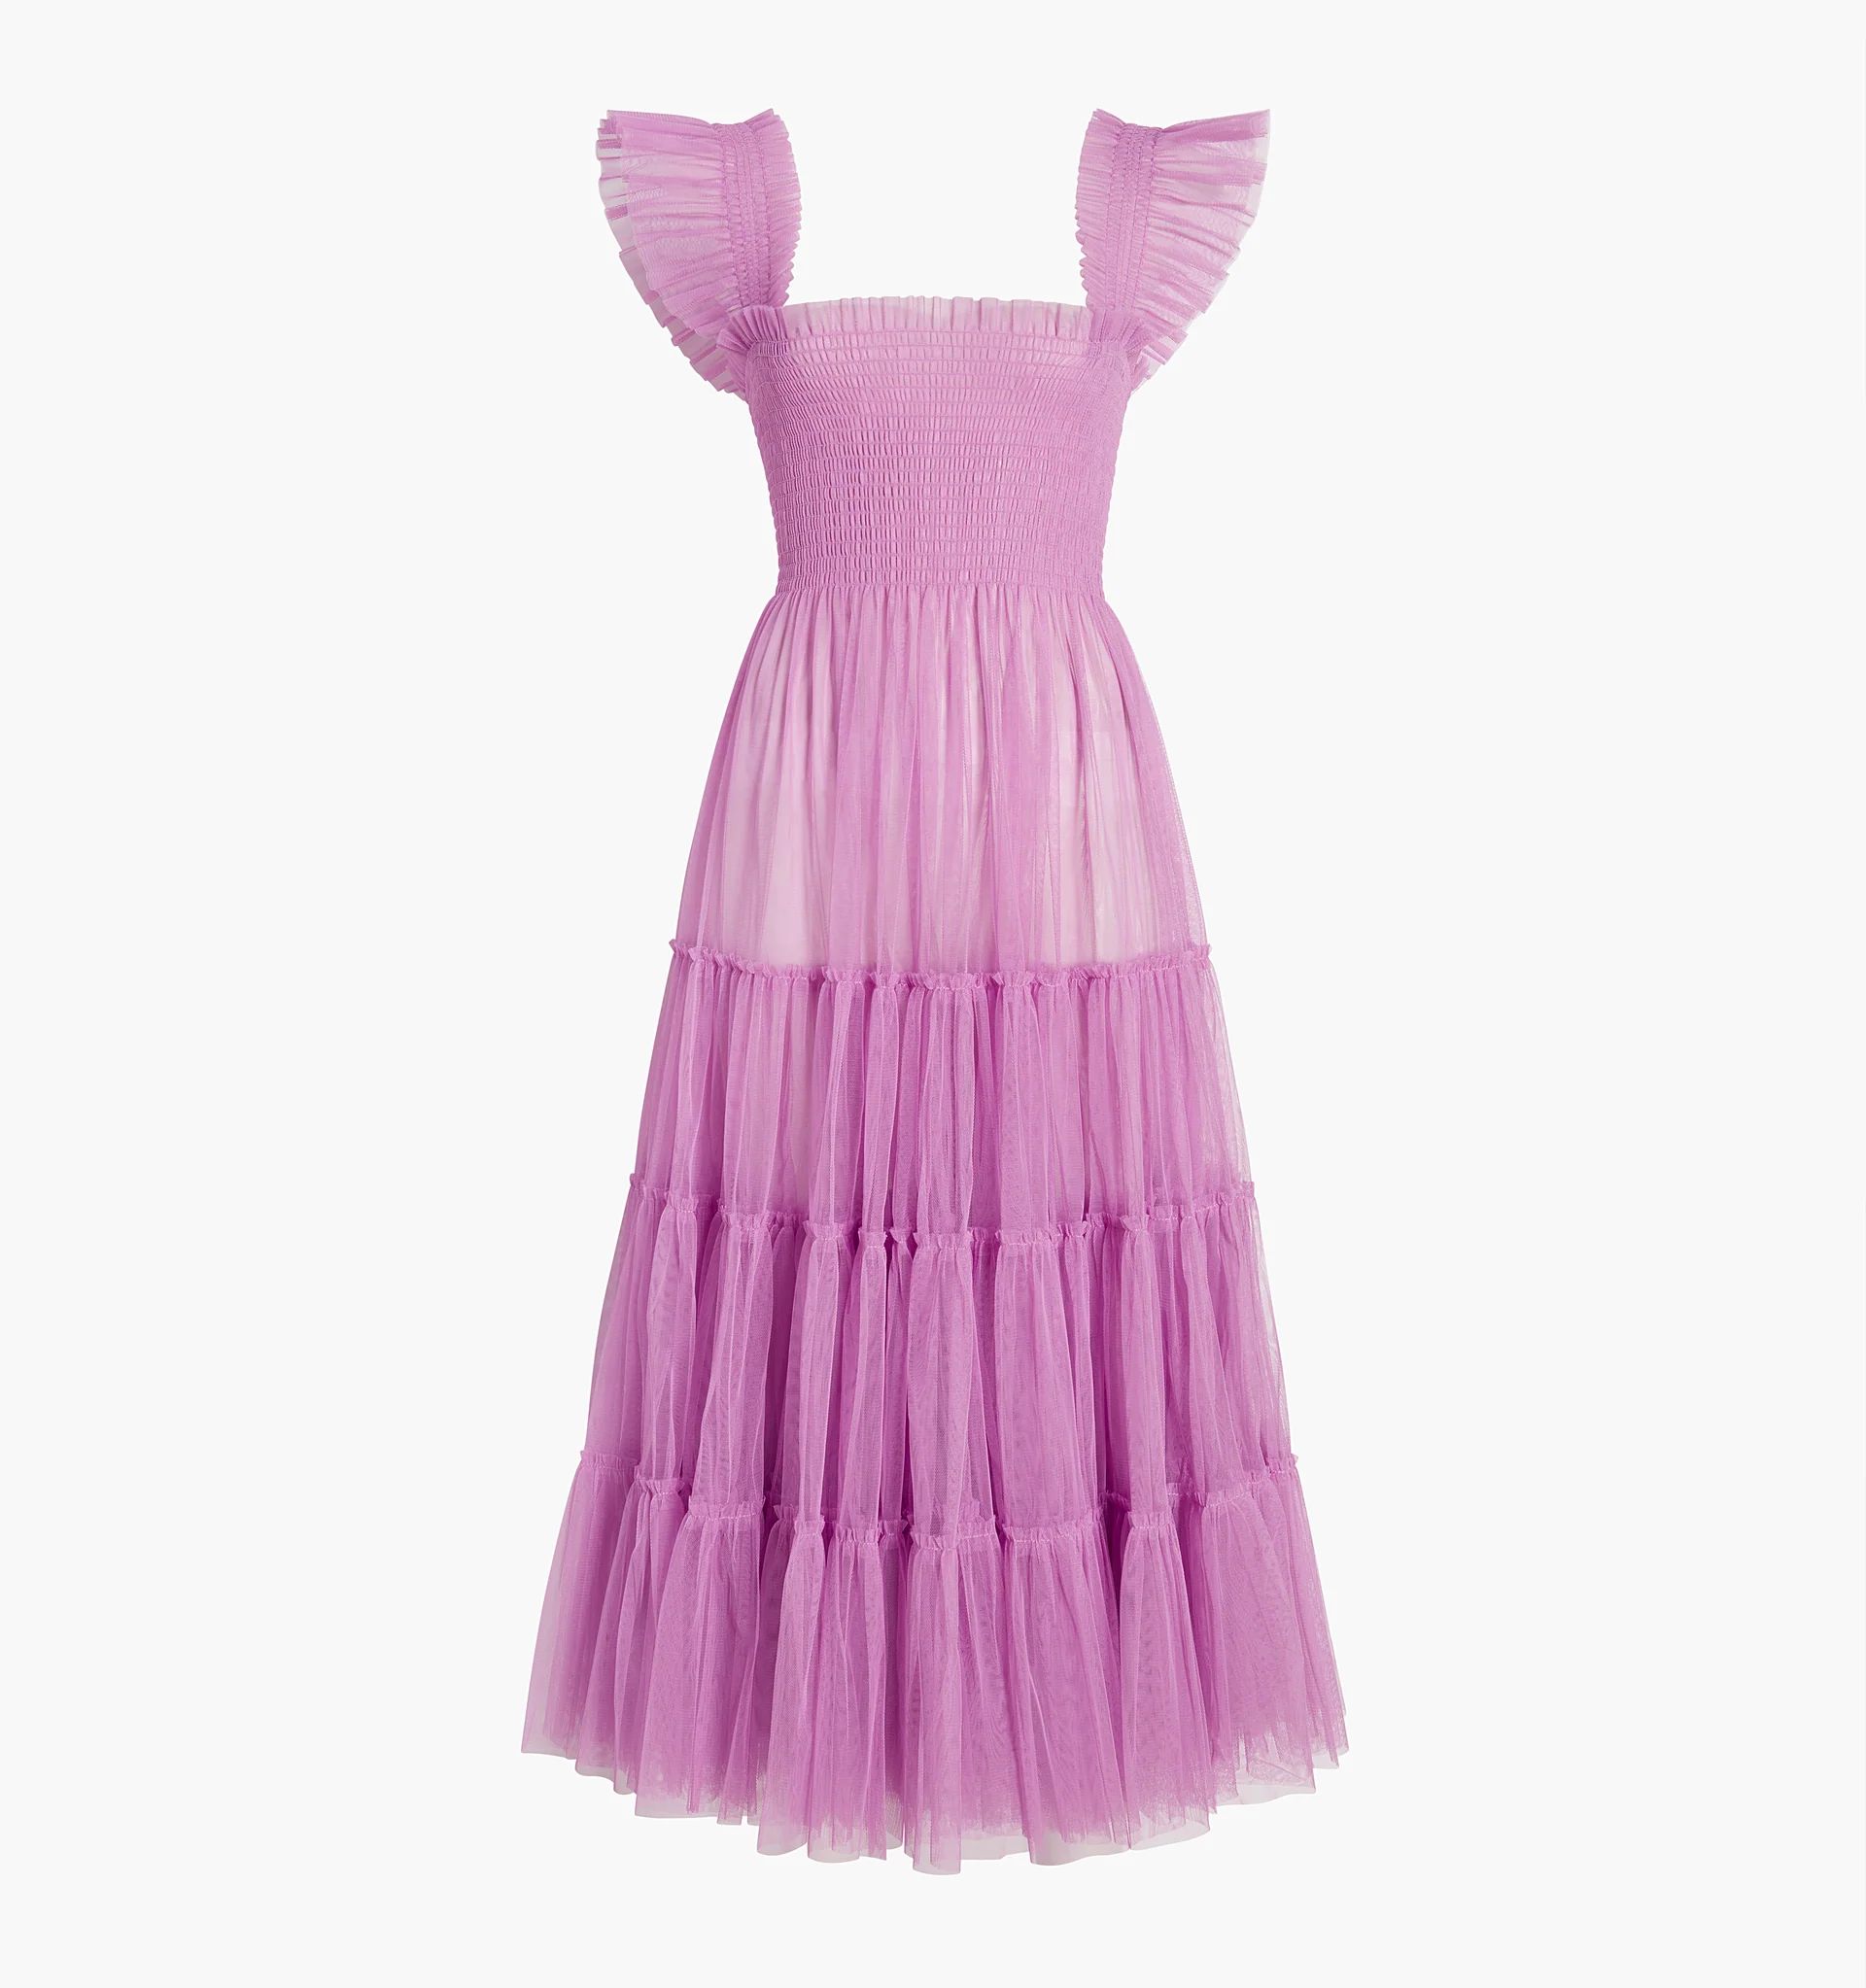 The Collector's Edition Ellie Nap Dress - Lilac Sky Tulle | Hill House Home